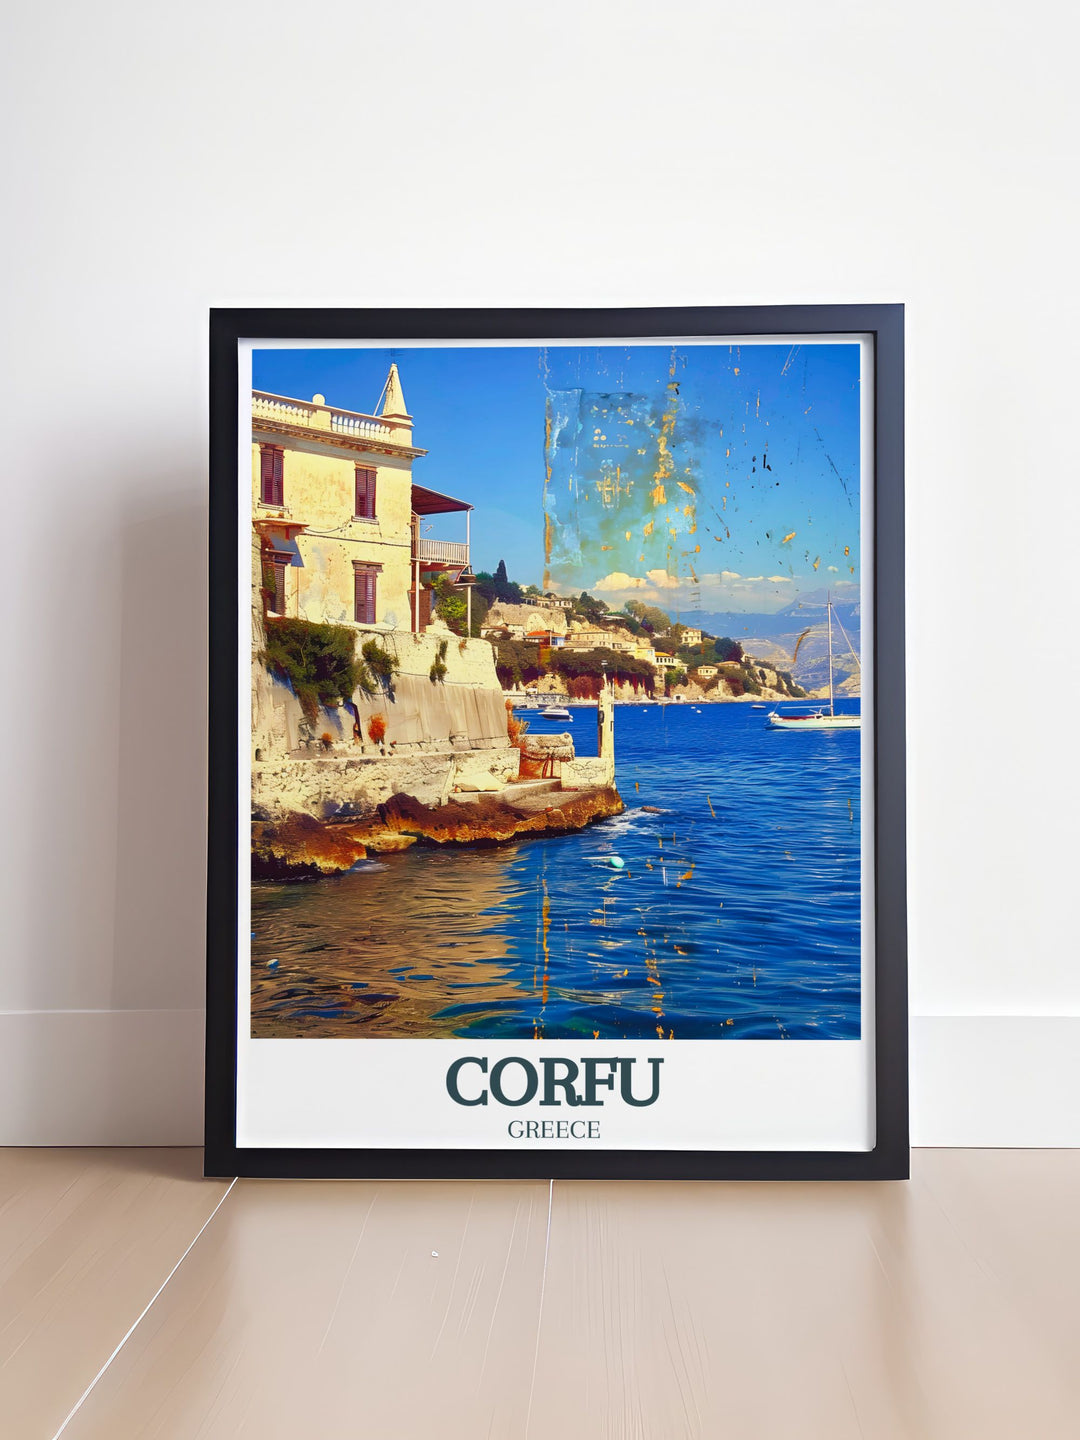 Corfu Greece print of the Old fortress of Corfu Ionian Sea ideal for those who love Corfu Island art and want to bring a piece of Greek history and stunning seascapes into their homes a perfect gift for travel enthusiasts and art lovers alike